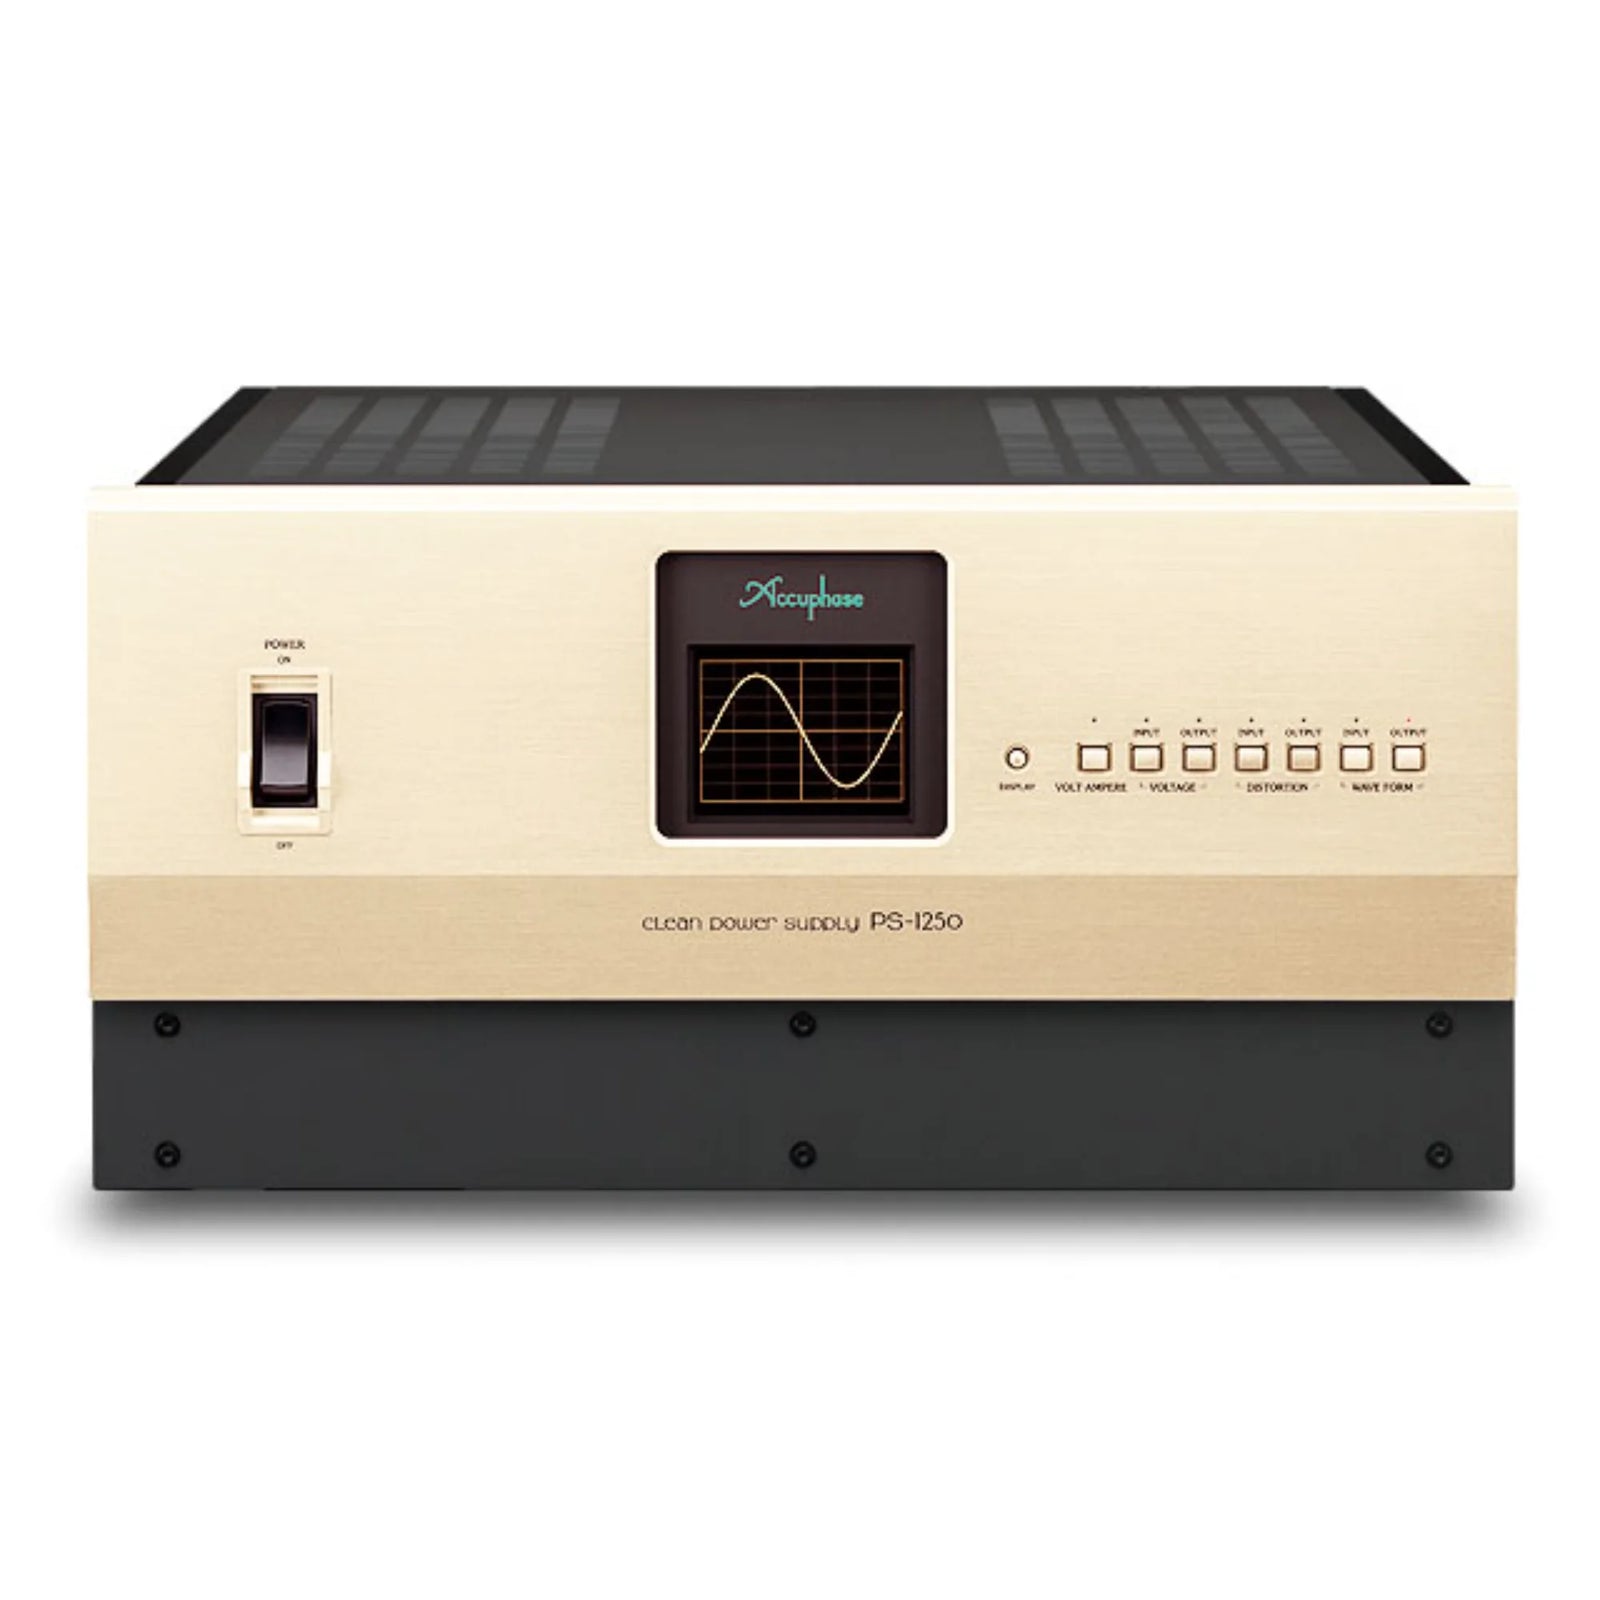 Accuphase PS-1250 Clean Power Supply 900 VA Product & Specification The power supply delivers the energy your audio equipment uses for music playback. Accuphase’s Clean Power Supply components provide a power source with minimum noise and distortion by utilizing a groundbreaking waveform shaping technology that compares the power supply’s waveform to a reference waveform, then supplements insufficiencies and removes any excess misshaping.